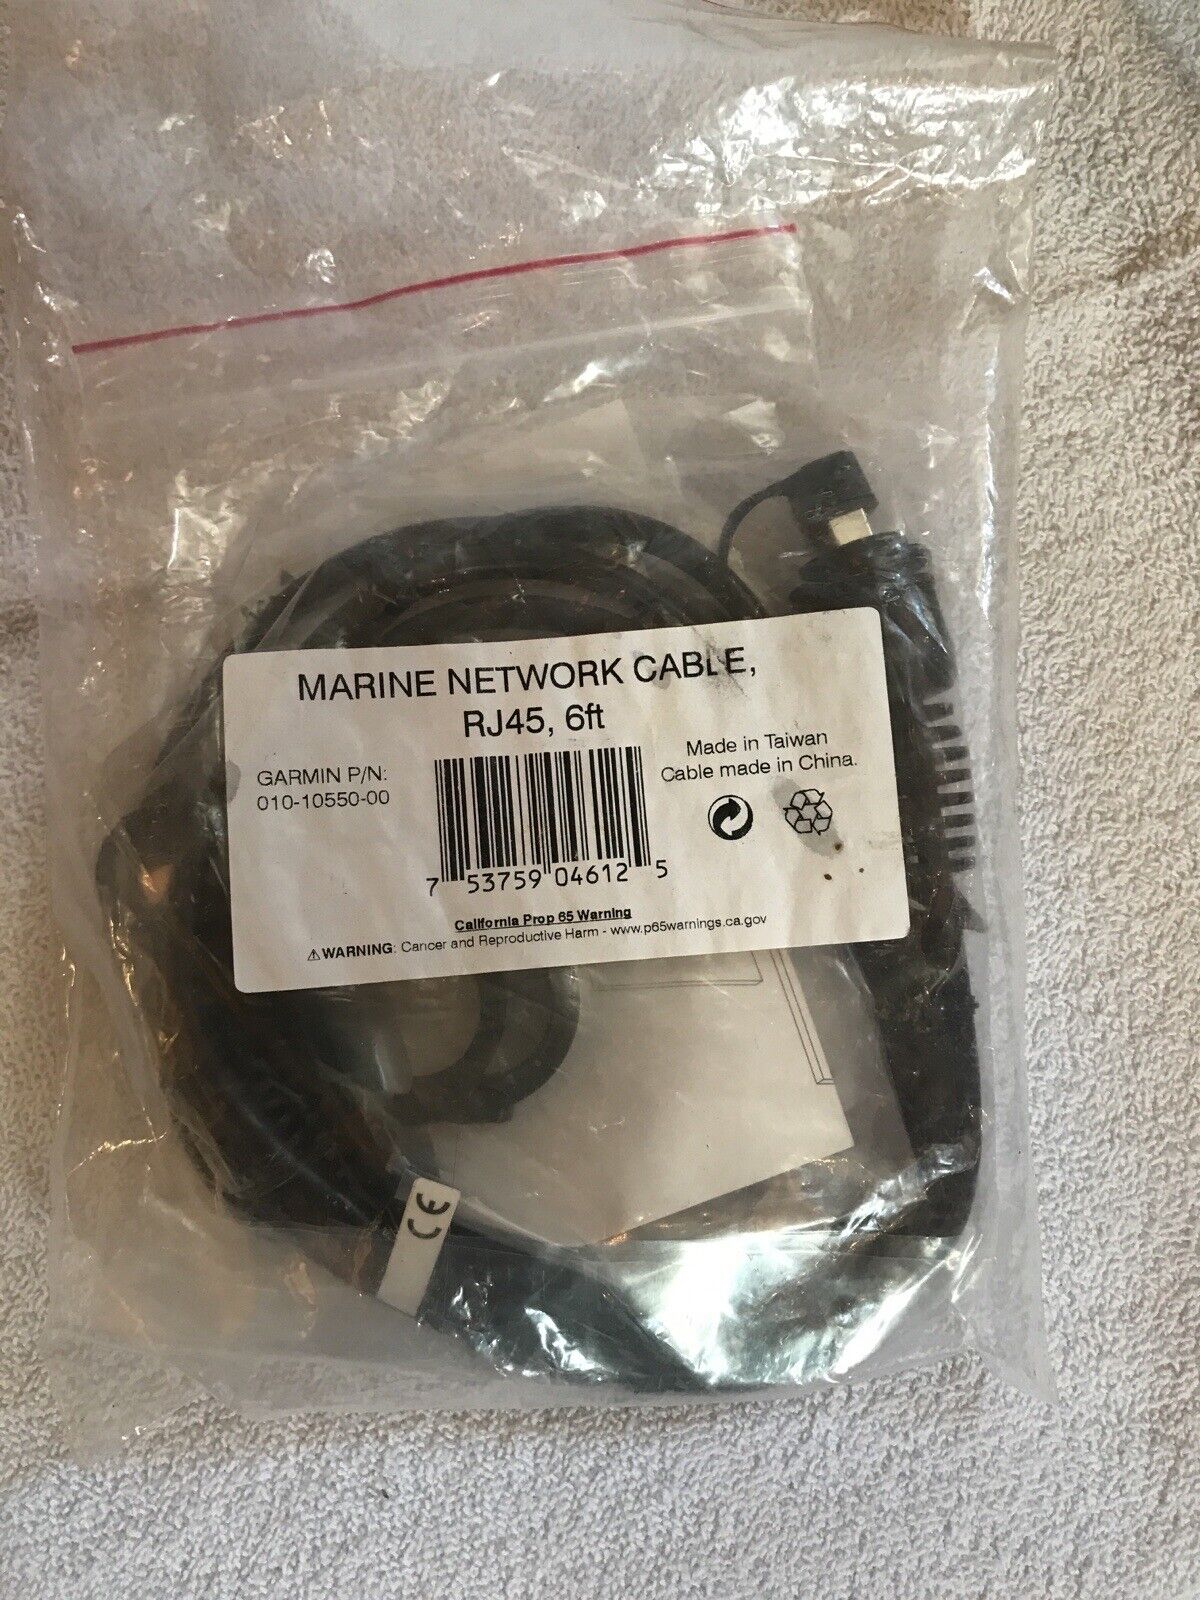 martine network cable 6ft